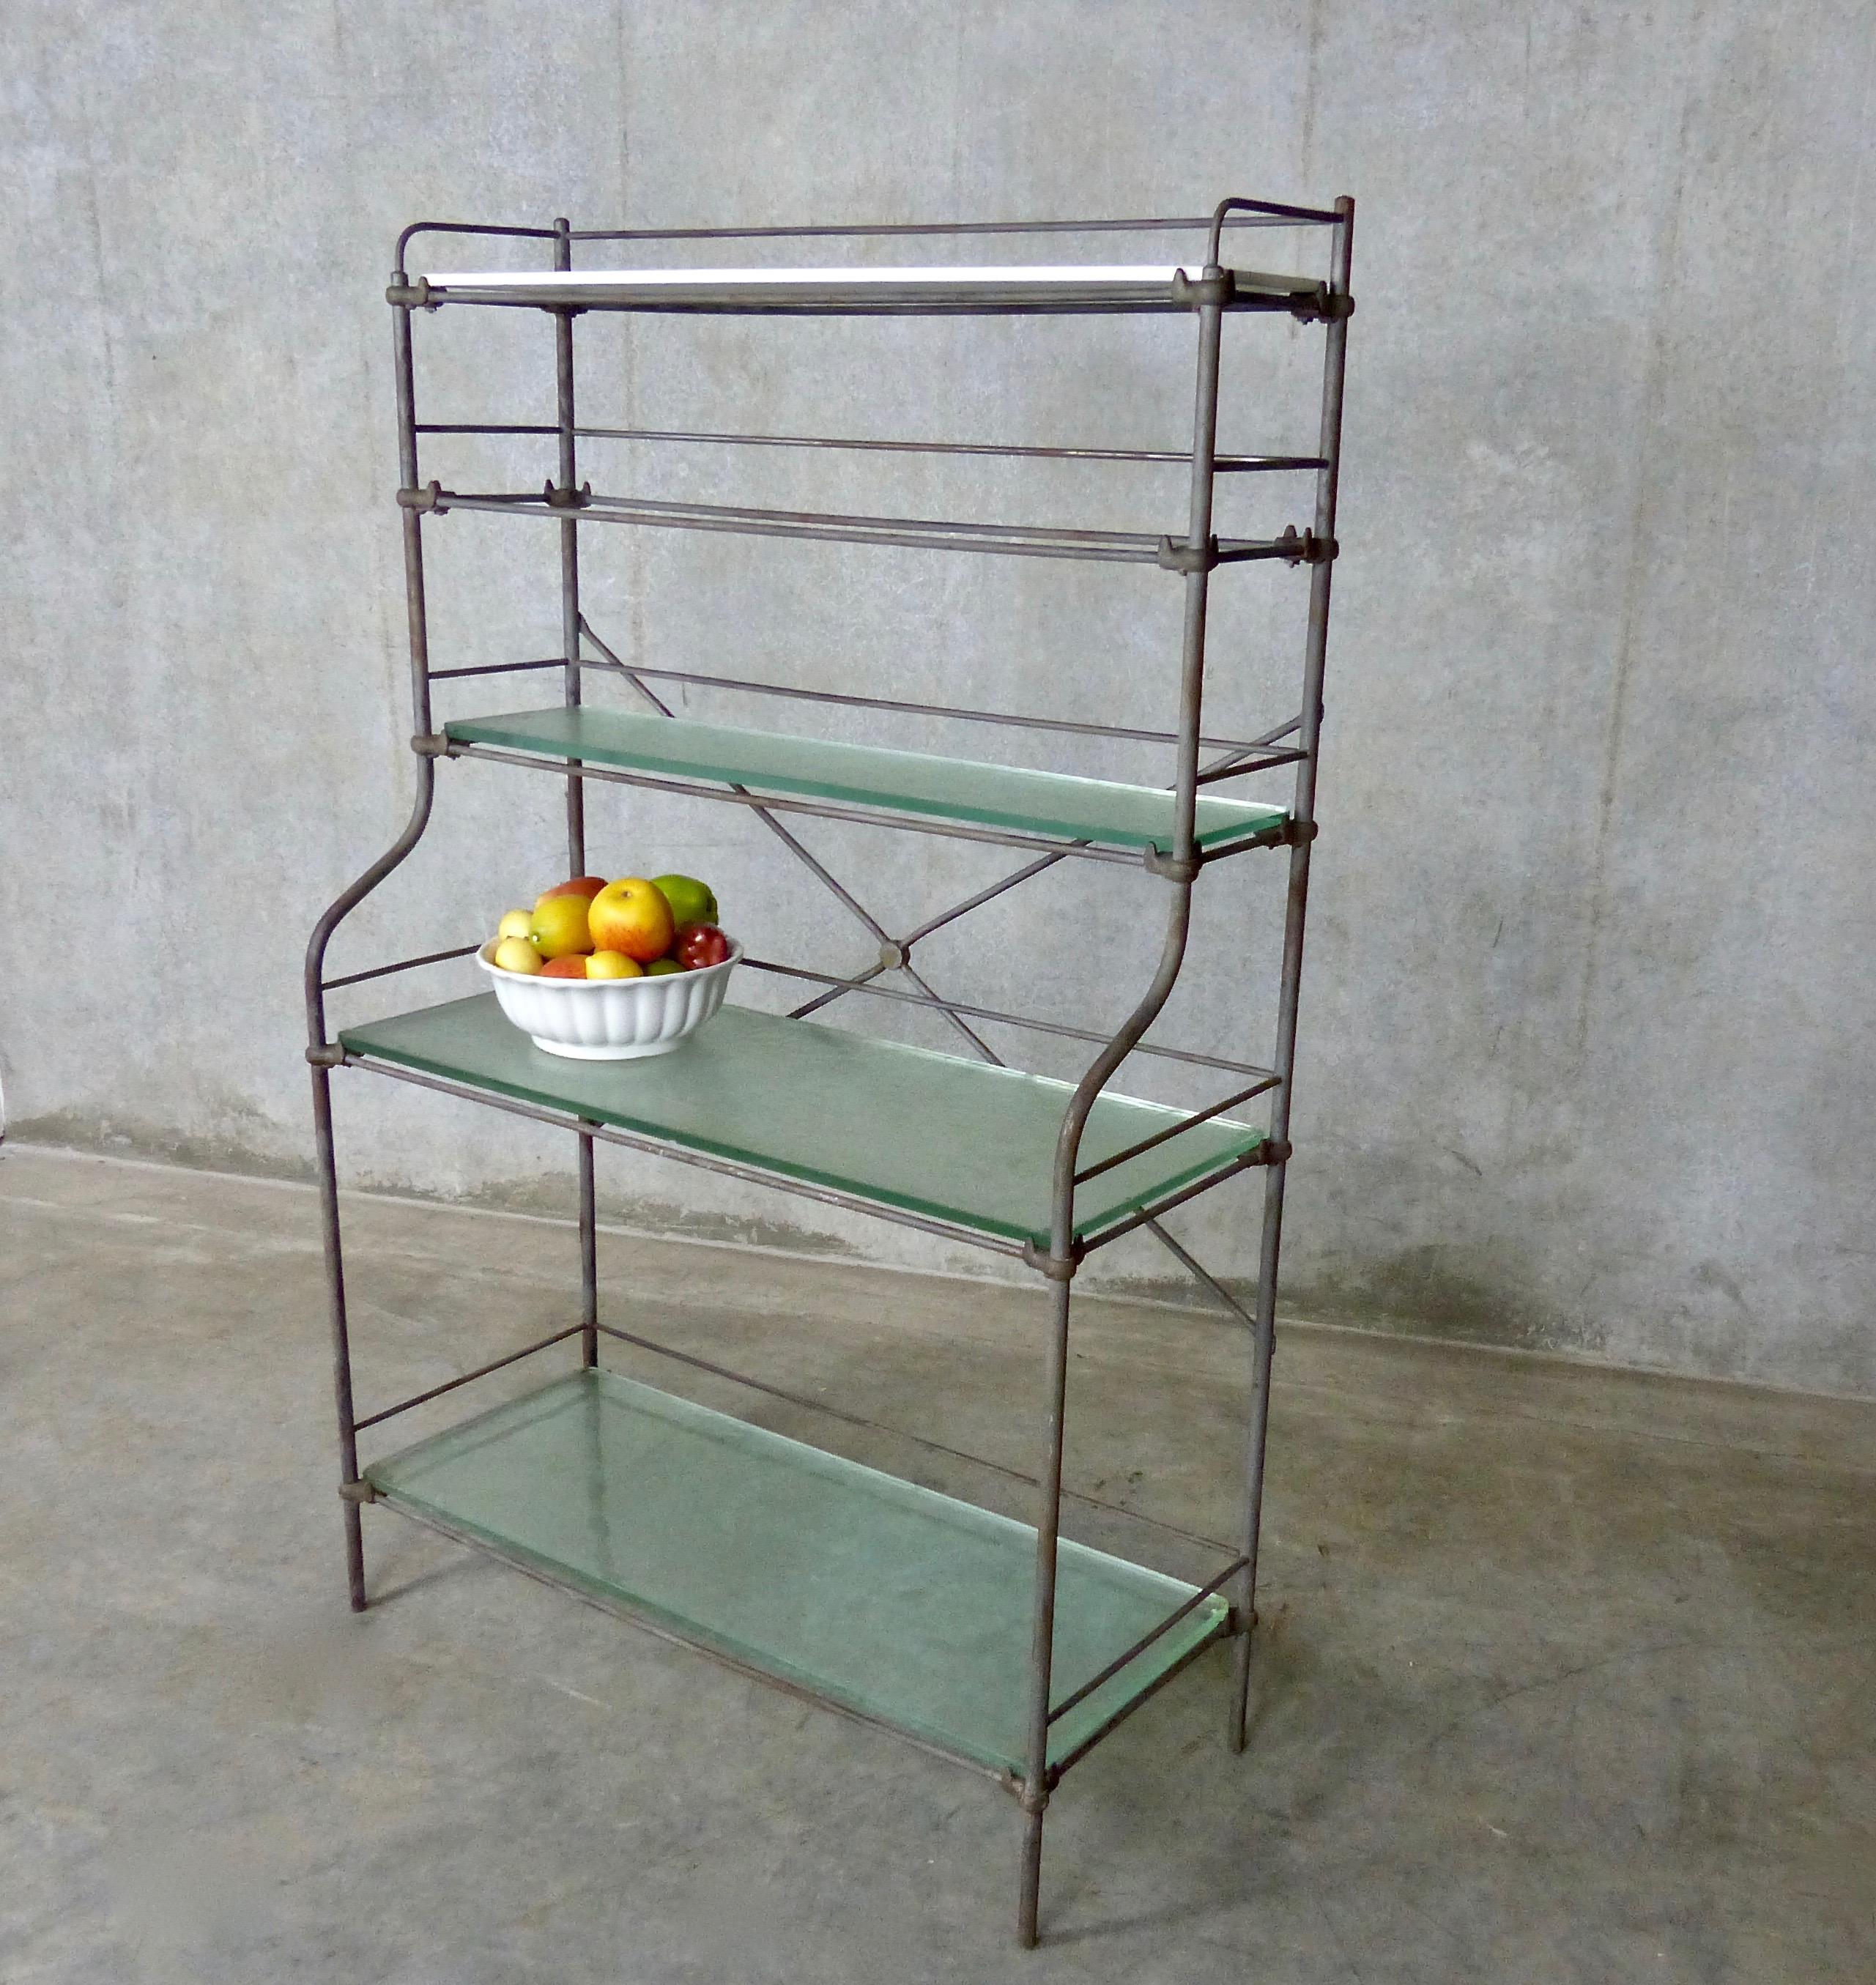 From the turn-of-the-last century, a five-tier, iron shelving unit/étagère from France. Features include glass shelves, unusual corner joinery, and stepped out lower shelves. Great storage/display unit for indoors or outdoors.
Dimensions: 59 H” x